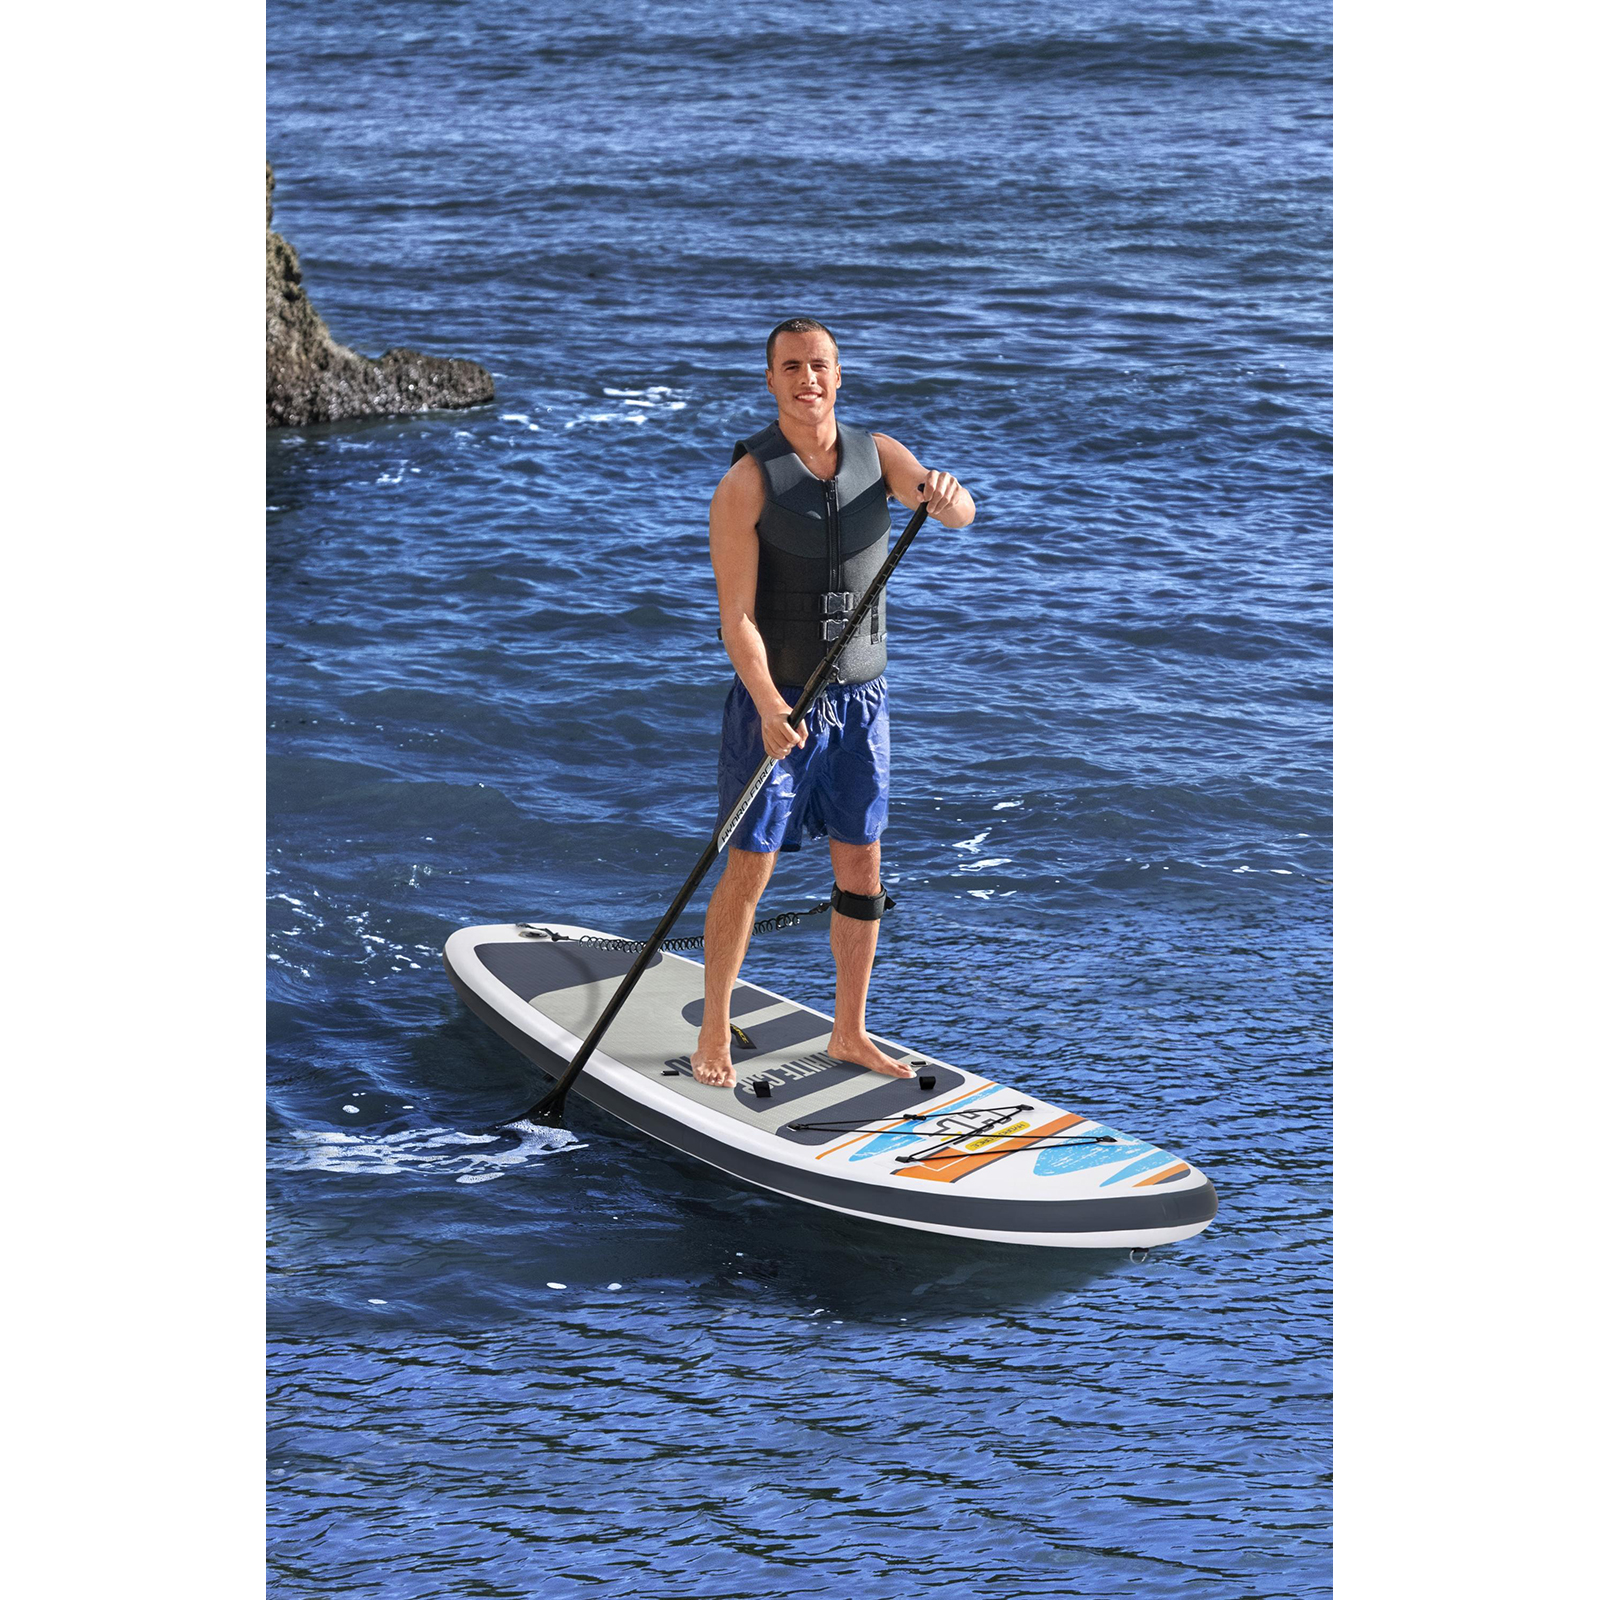 Tabla Paddle Surf Hinchable Bestway Hydro-force White Cap 305x84x12 Cm Remo Doble, Asiento, Bomba,